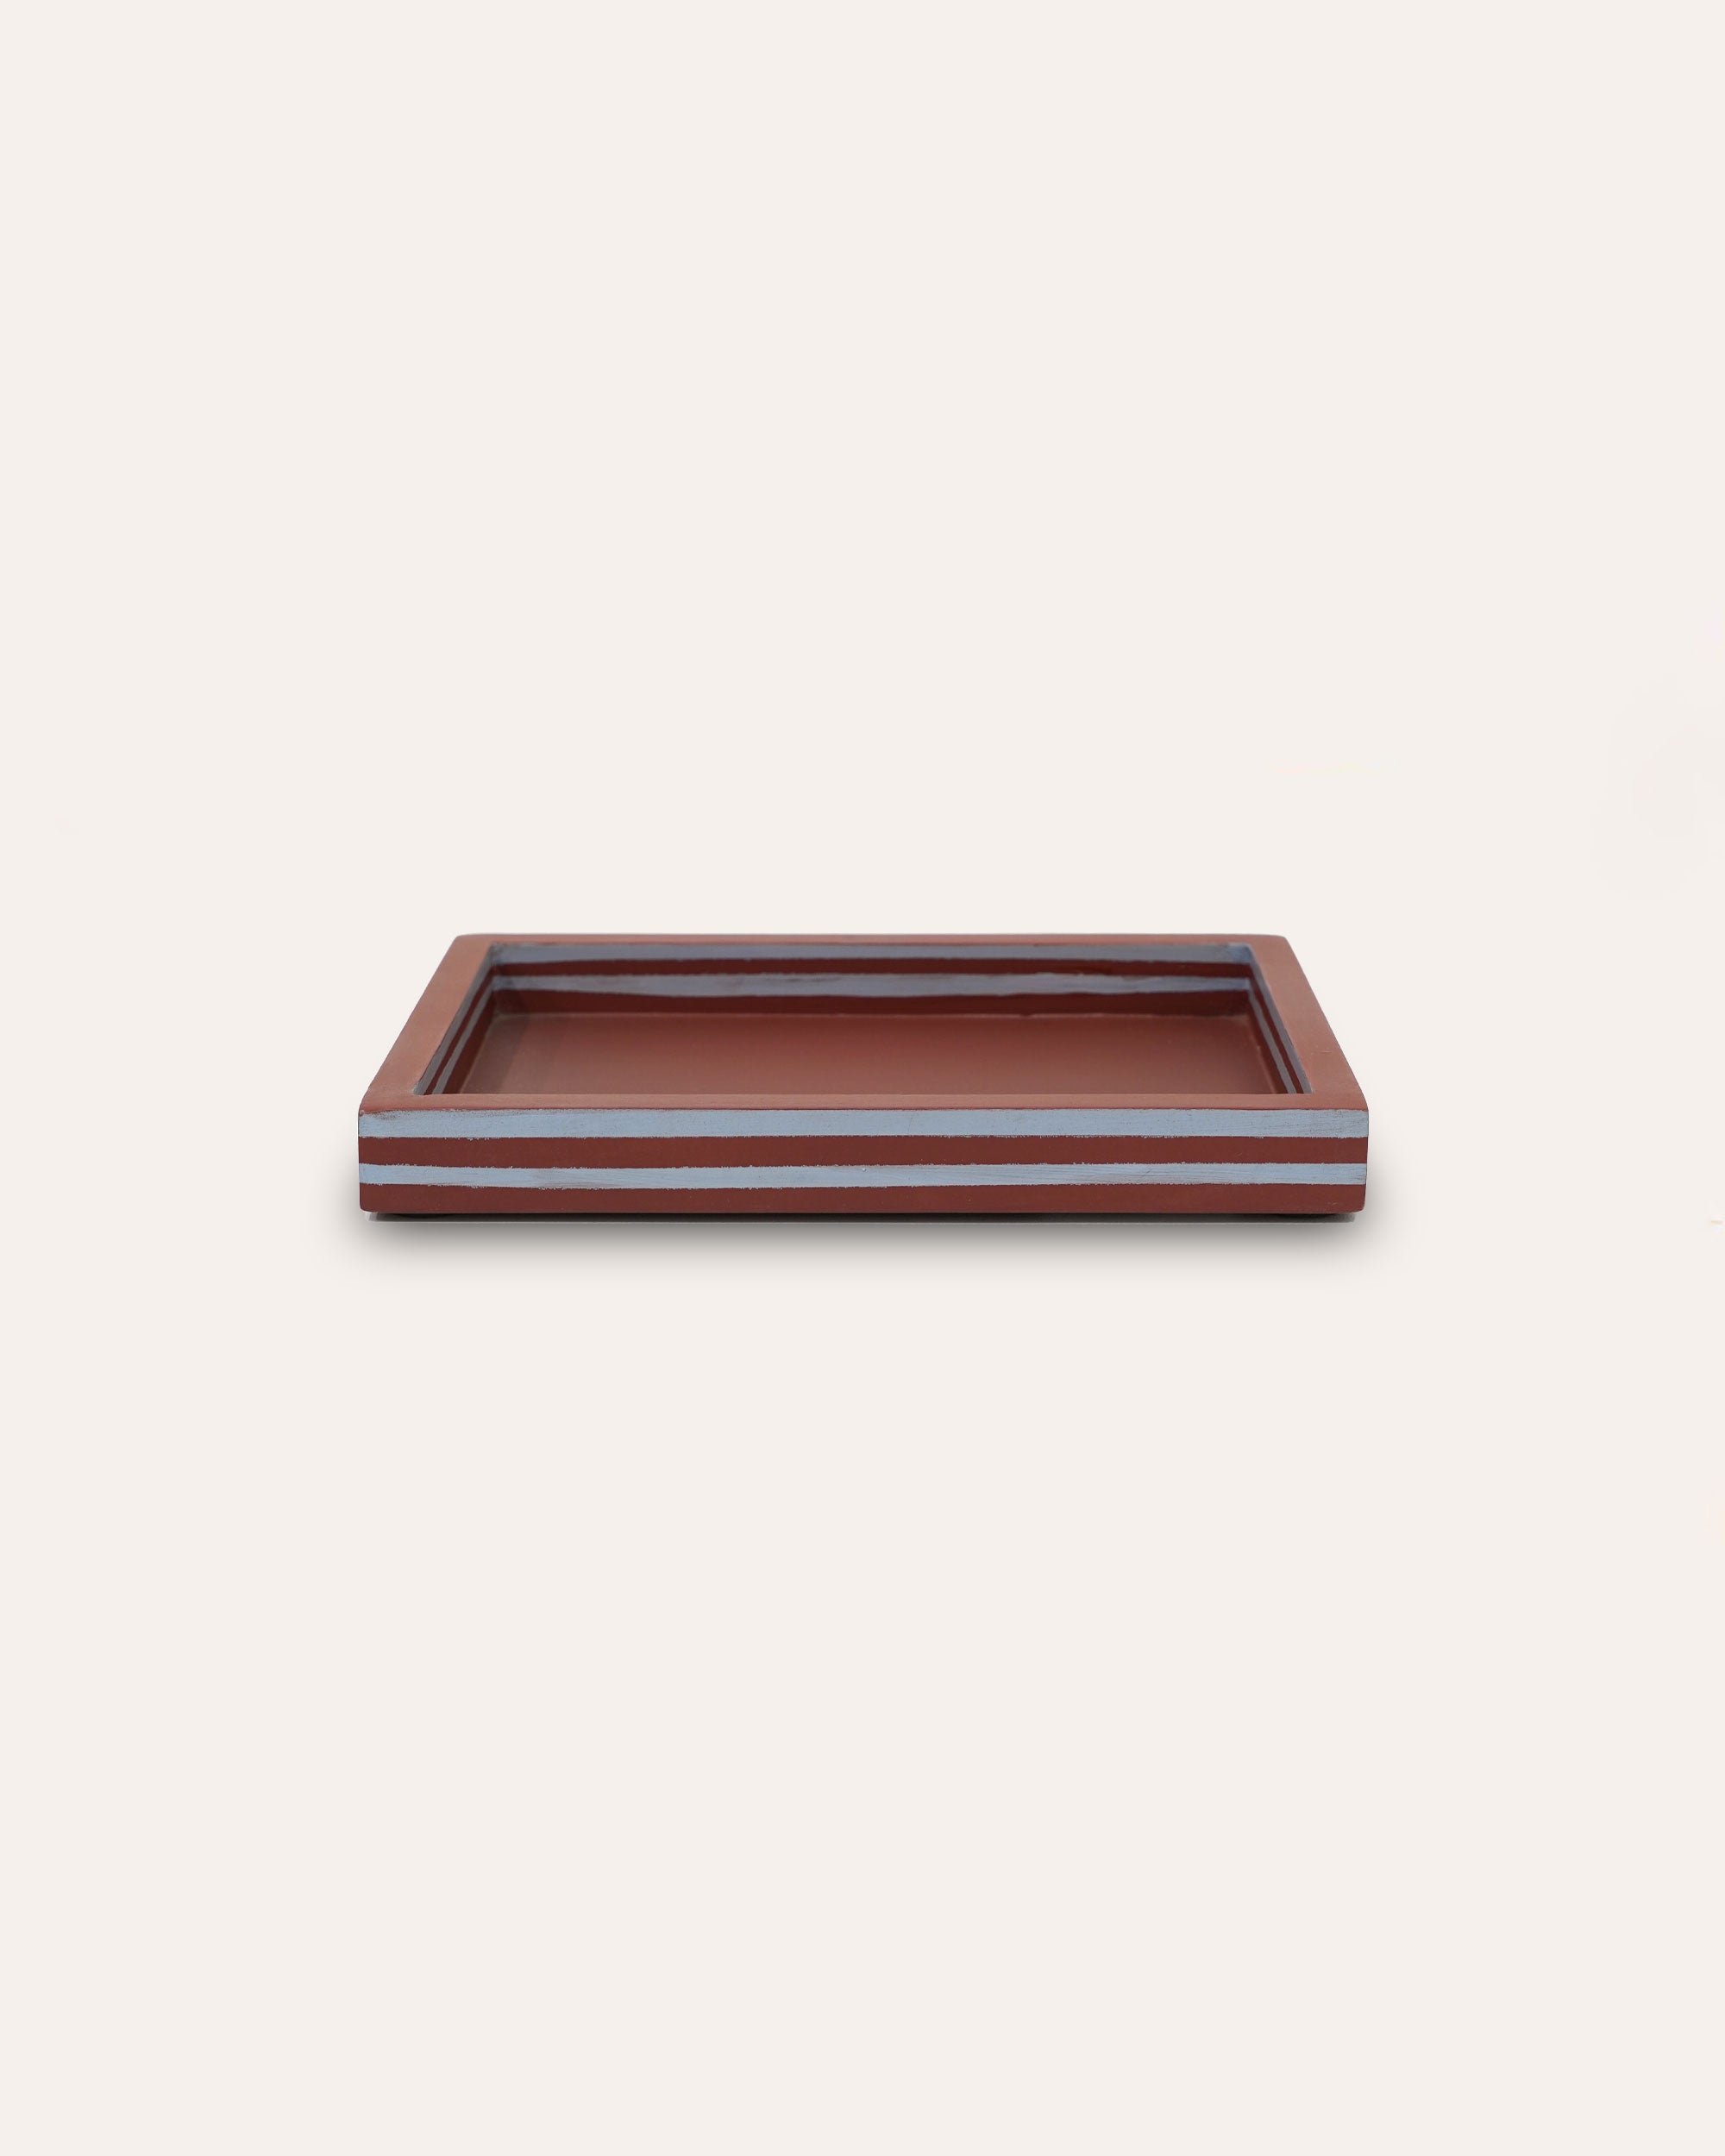 The Chic Stripey Tray - Small